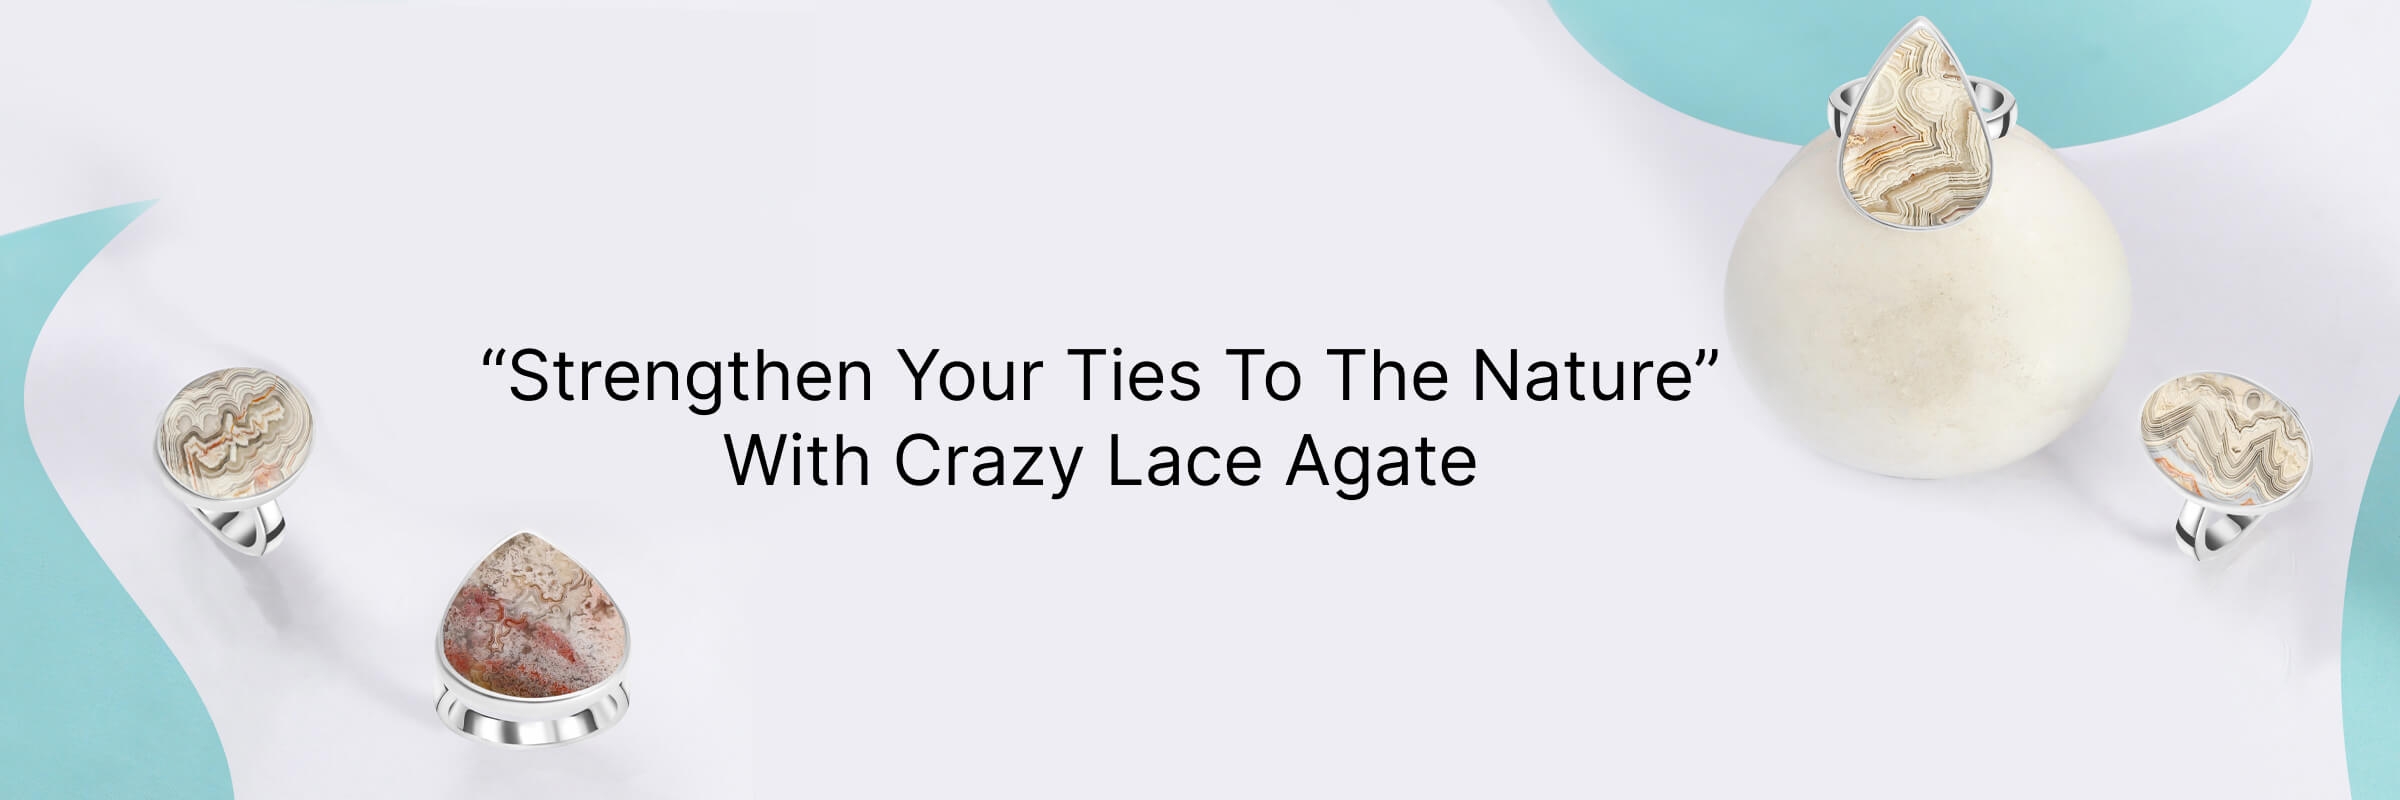 Crazy Lace Agate : Physical health benefits